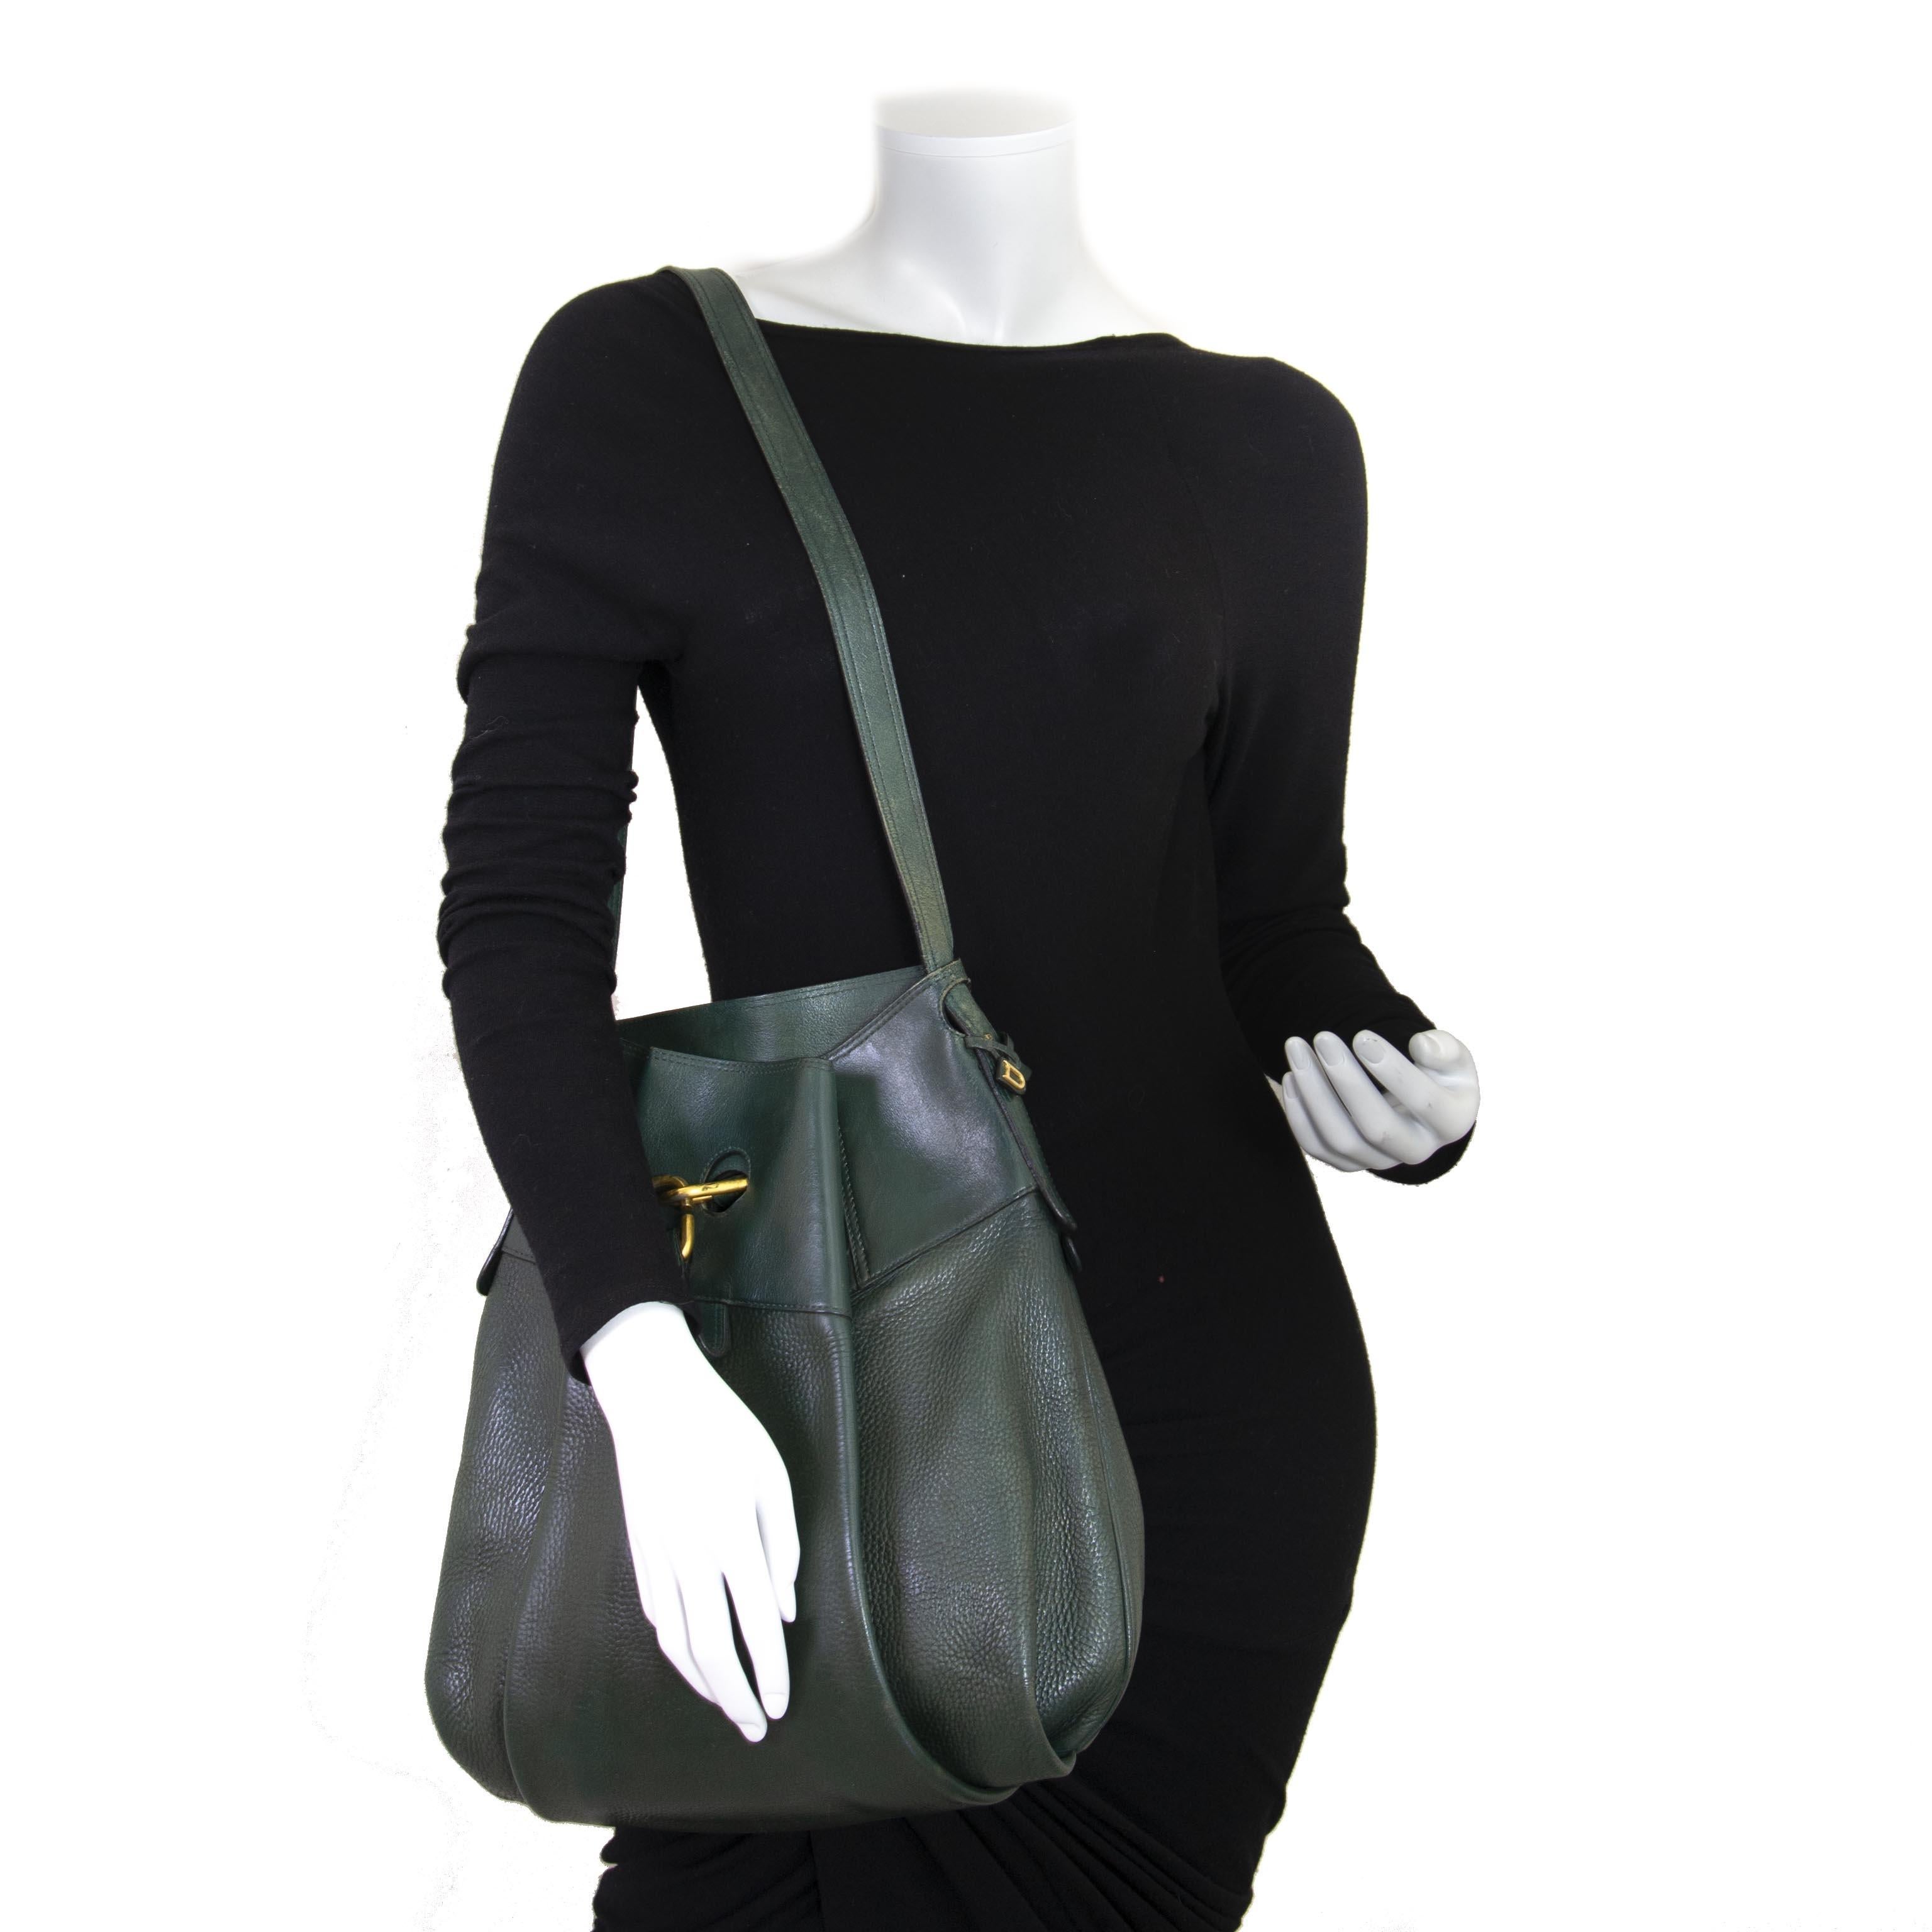 Good condition

Delvaux Green Faust Bag

The iconic 'Faust' bag is a well-known model in the collection of Delvaux. The bag features a decorative lock on the front and provides easy access in the back. Open the bag with the gold-toned zipper and